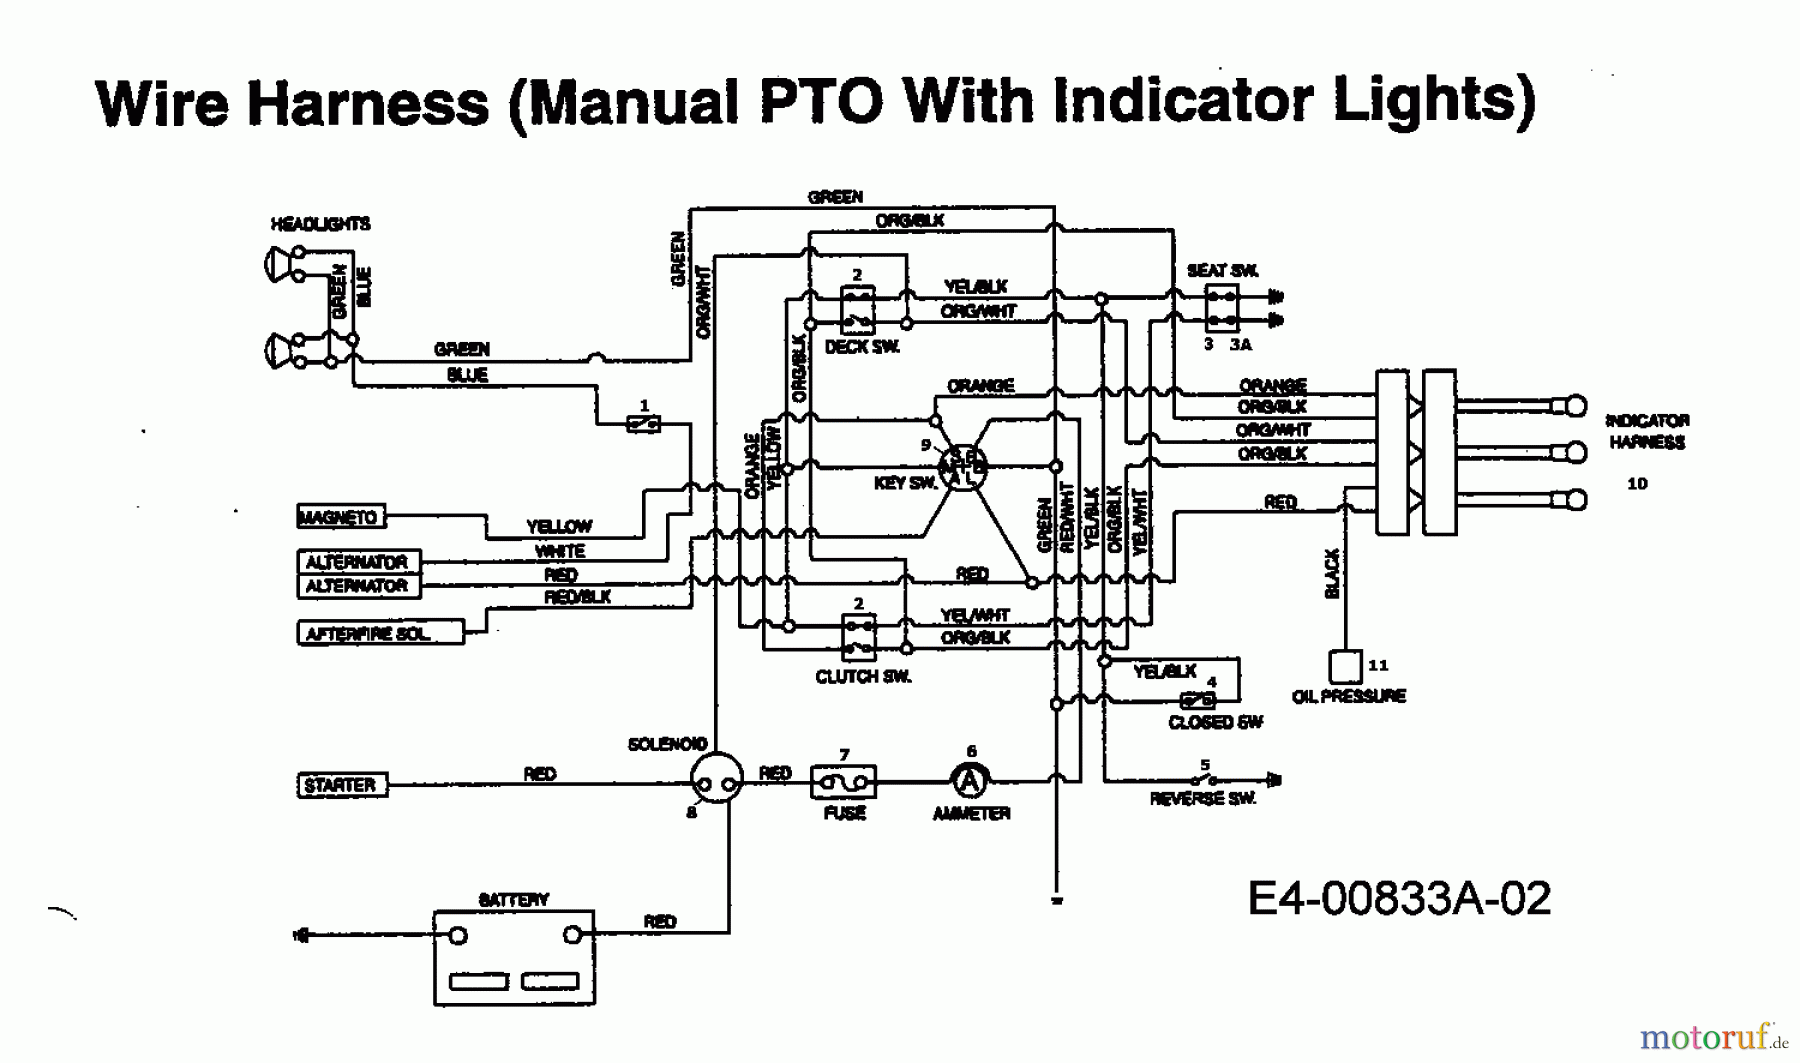  Raiffeisen Lawn tractors RMH 13-102 H 13AA793N628  (1998) Wiring diagram with indicator lights